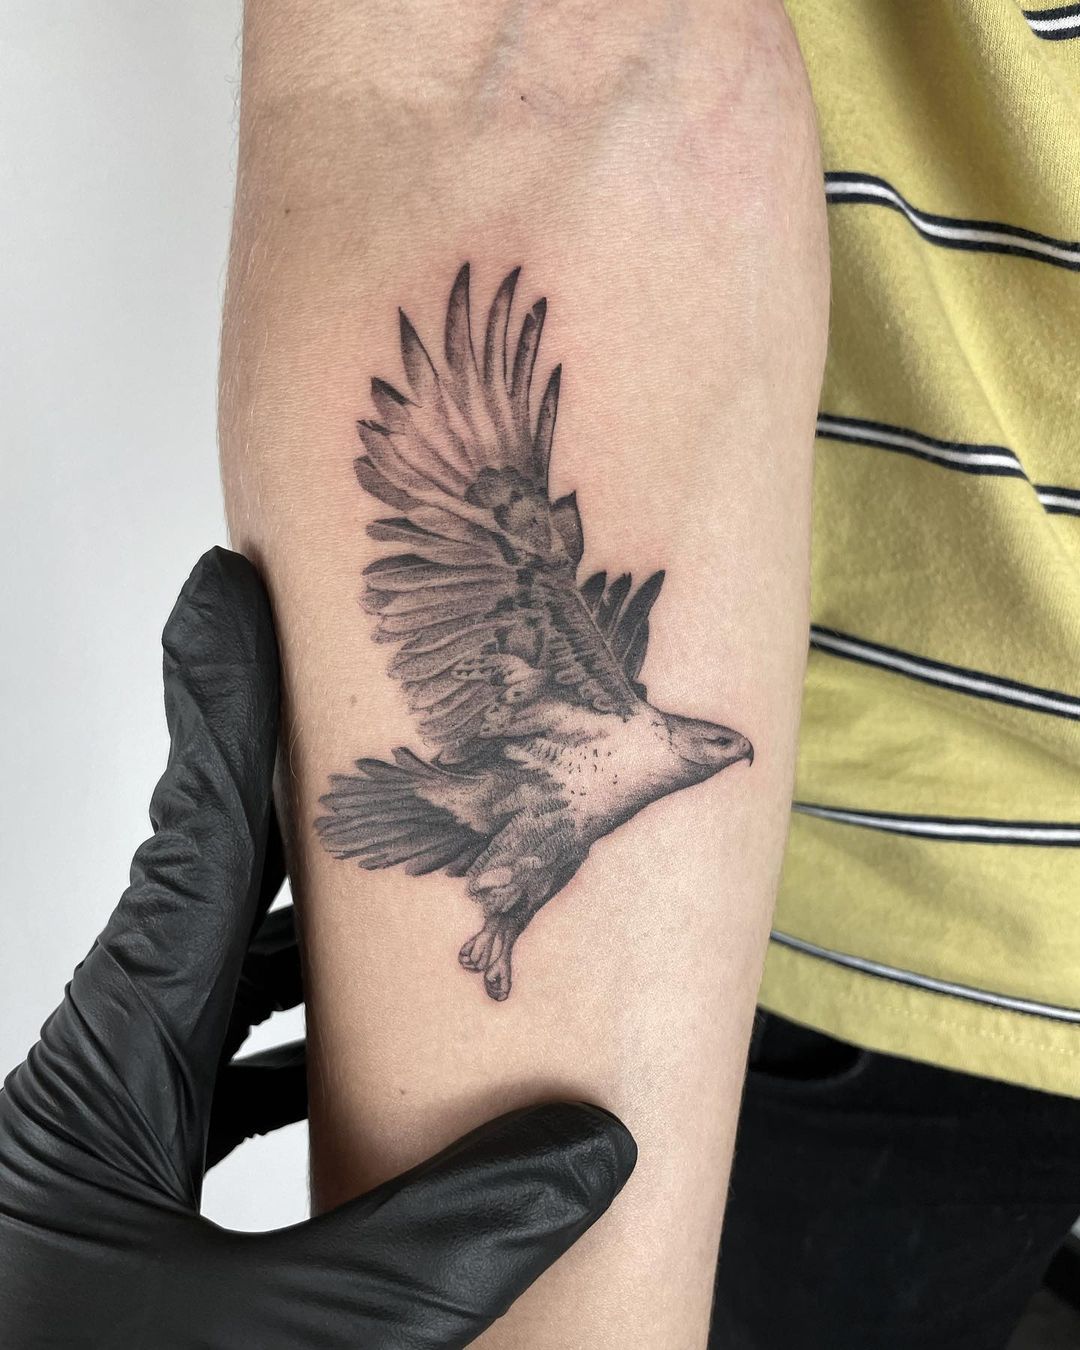 Red tailed hawk done by me JustinRakowskiTattoo at Art Machine  Productions in Philadelphia PA  rtraditionaltattoos